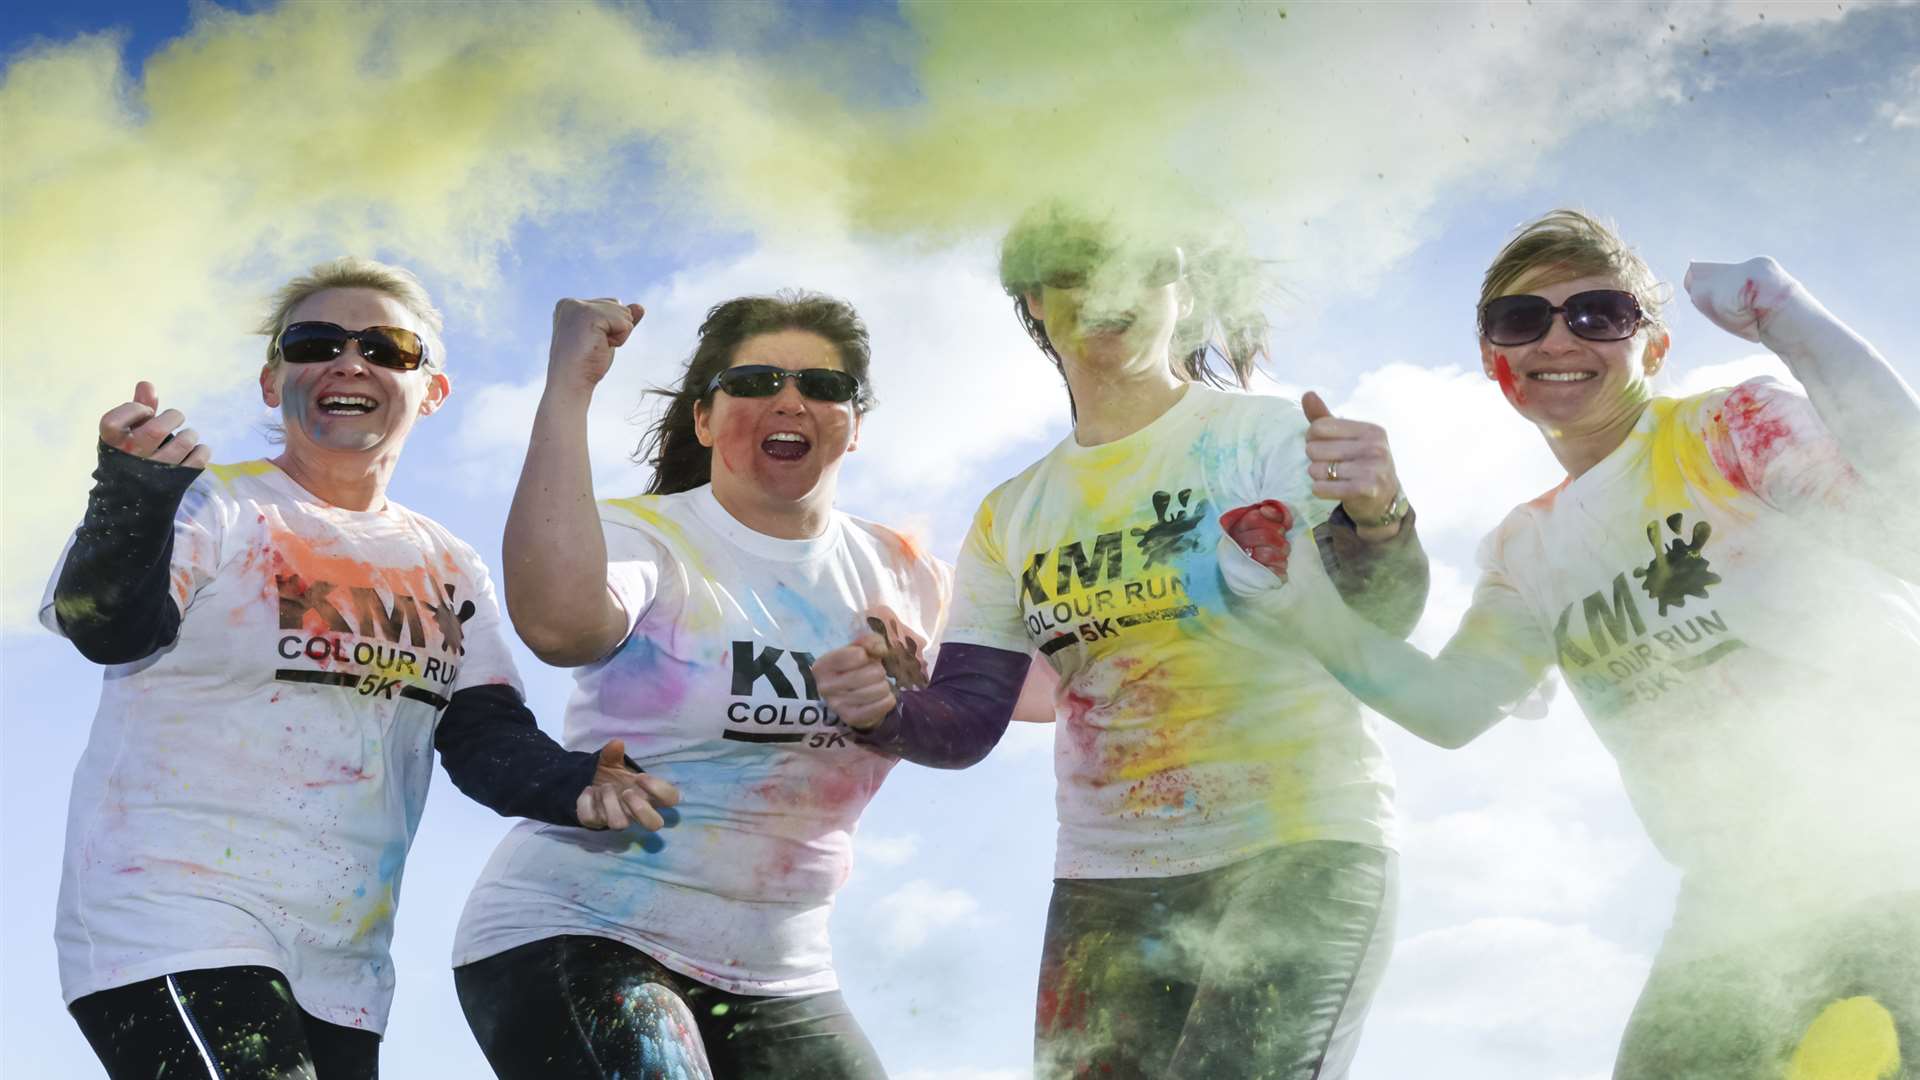 From left, Justine Walsh, Jessica Messenger, Dee Murphy and Jo Irwin from Martha Trust are supporting the KM Colour Run.